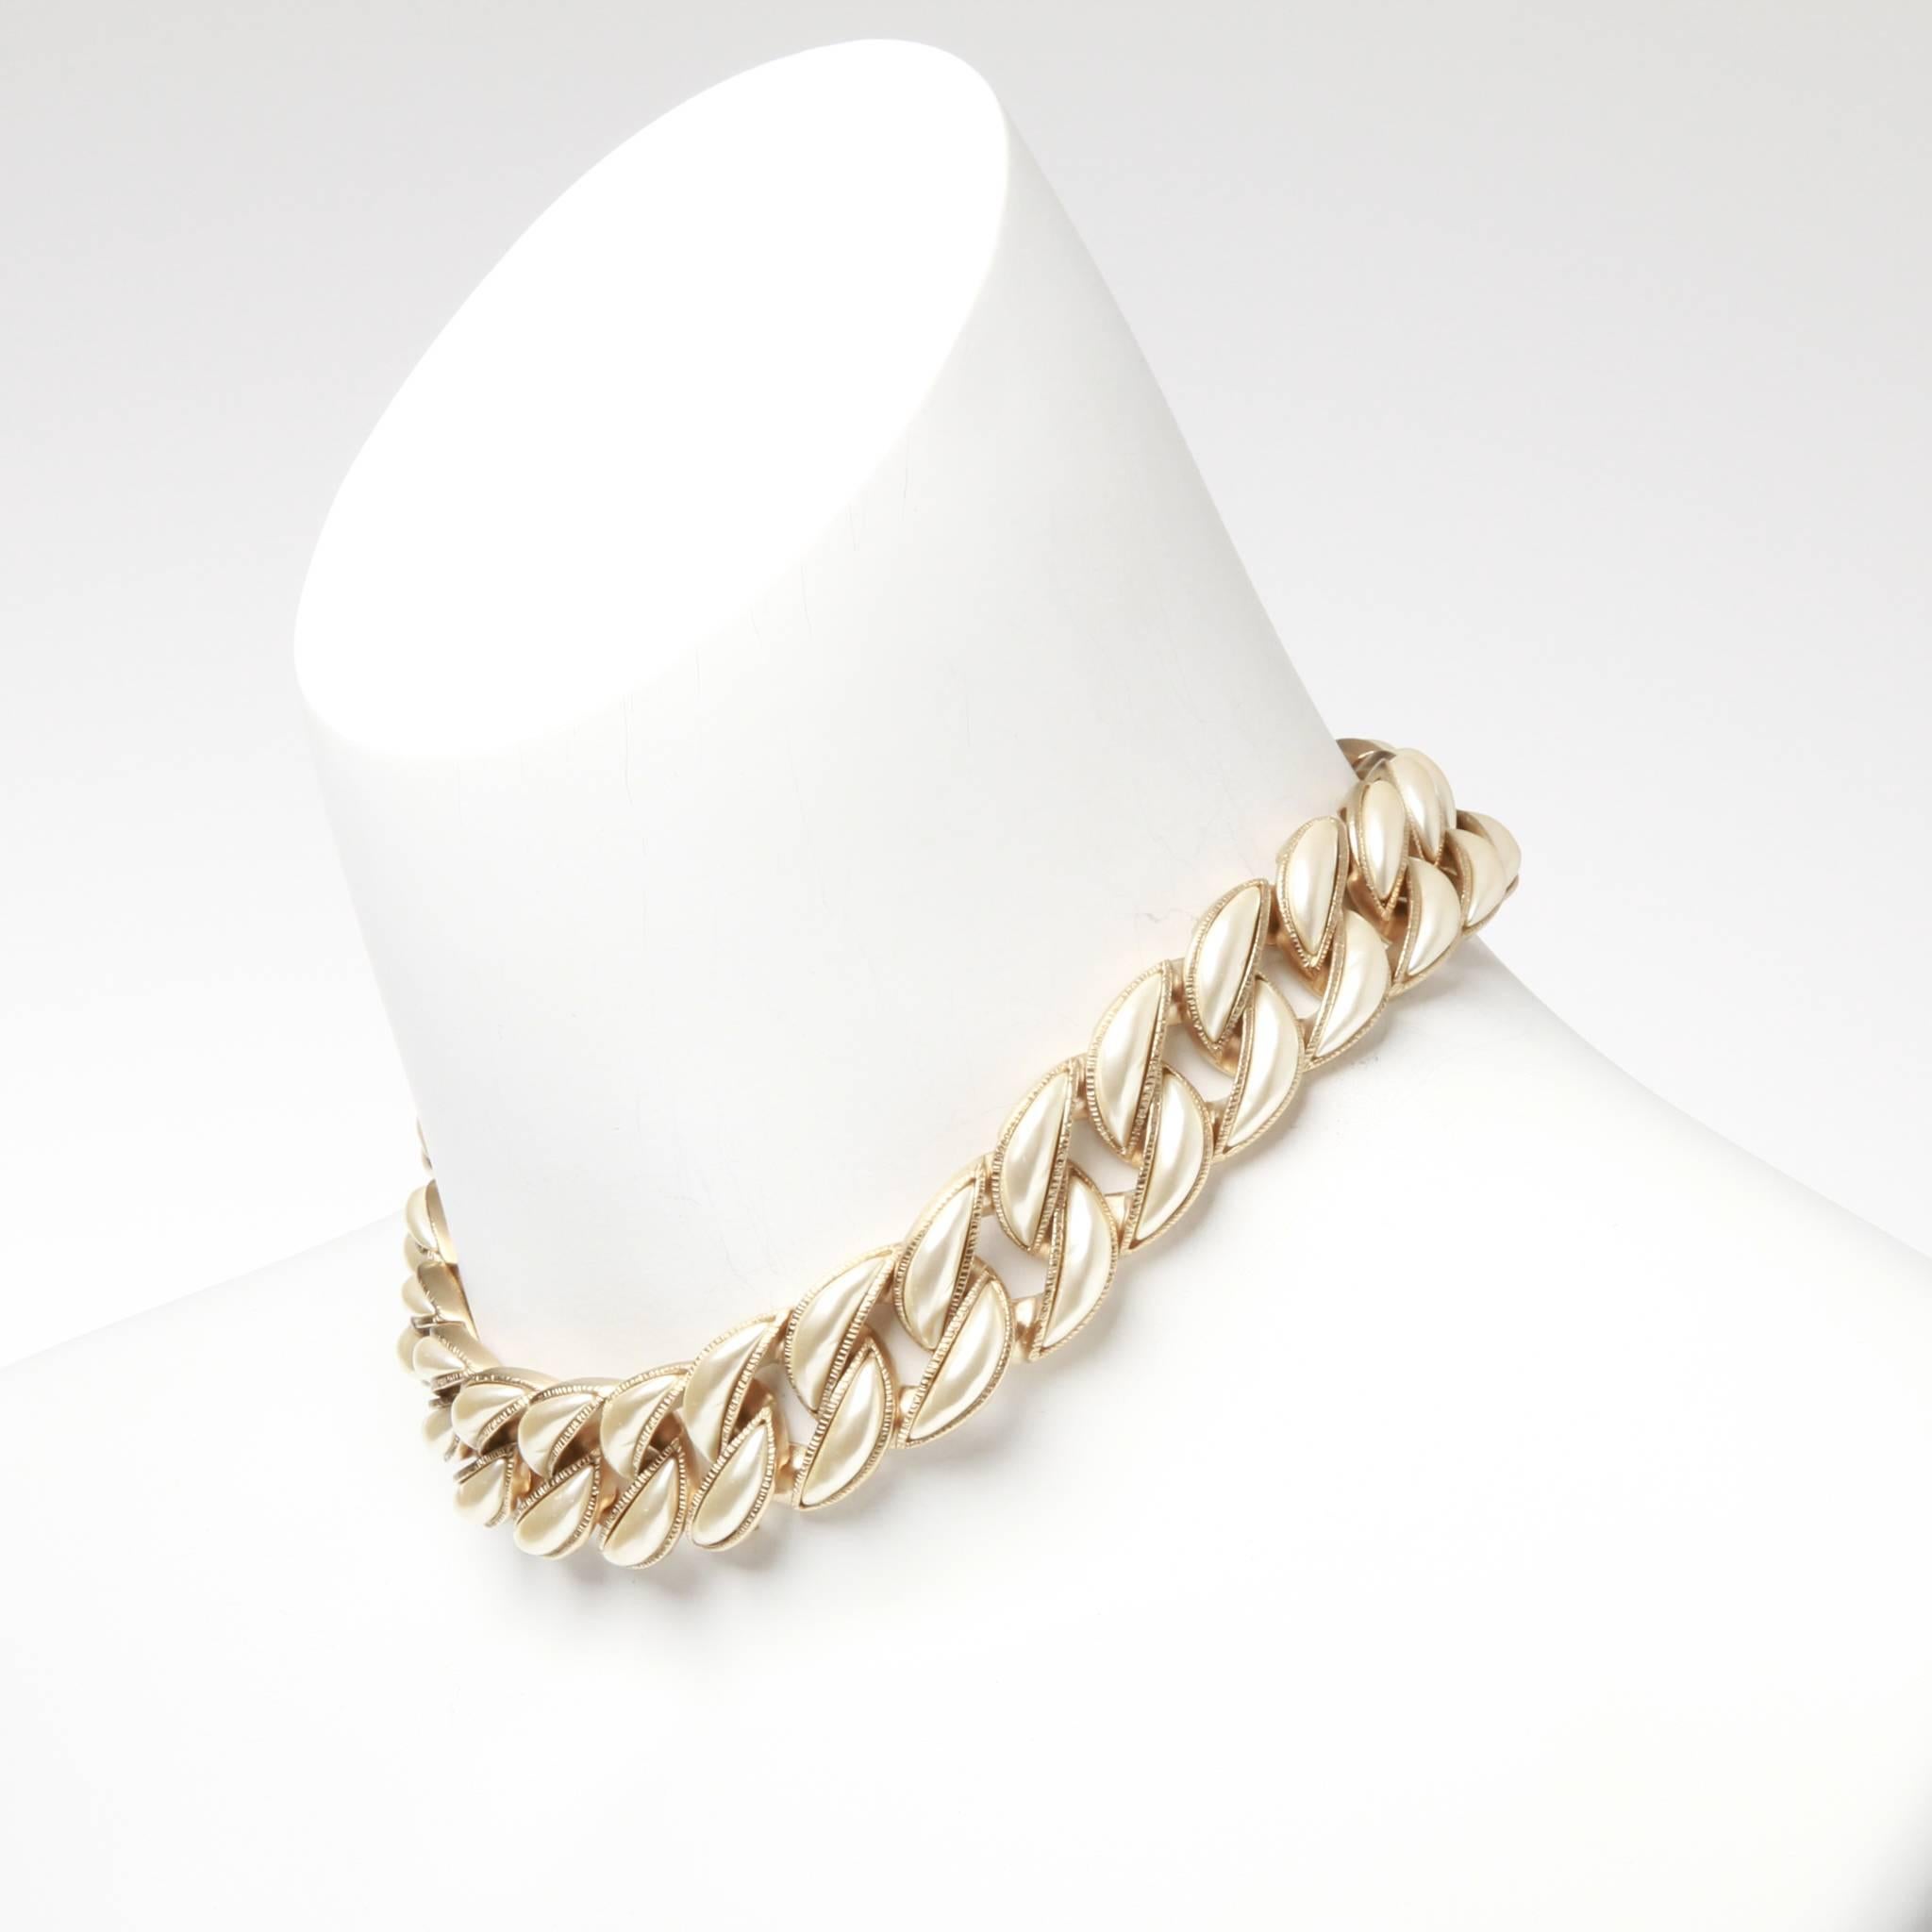 Pale champagne gold-tone Chanel curb chain choker featuring pearl embellishment and adjustable lobster clasp closure with CC charm. Stamped A15 B. 

With authentic and original box and jewellery pouch.

